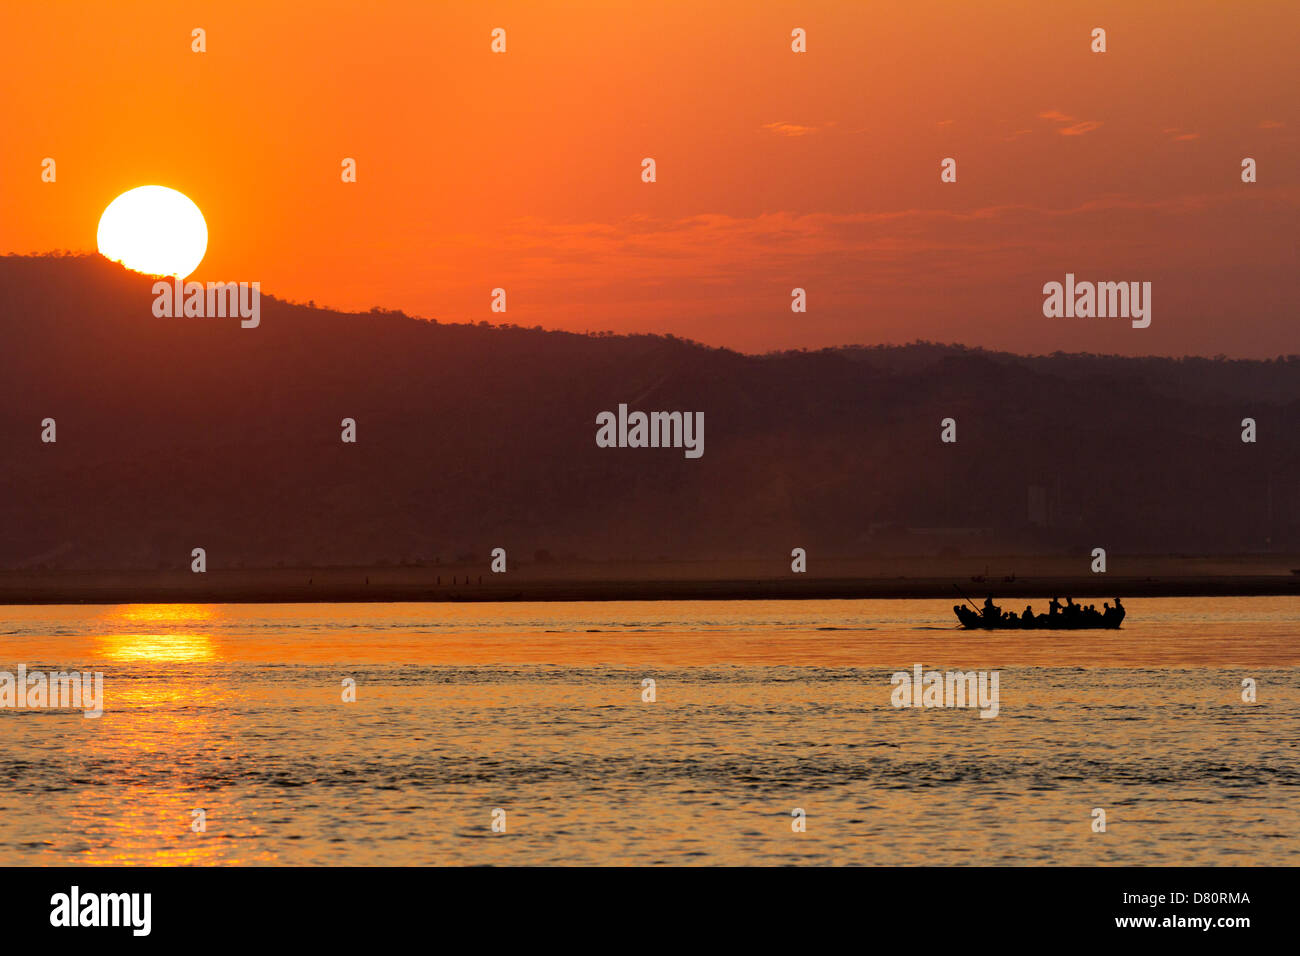 Sunset over the Irrawaddy River at Mandalay, Myanmar 5 Stock Photo